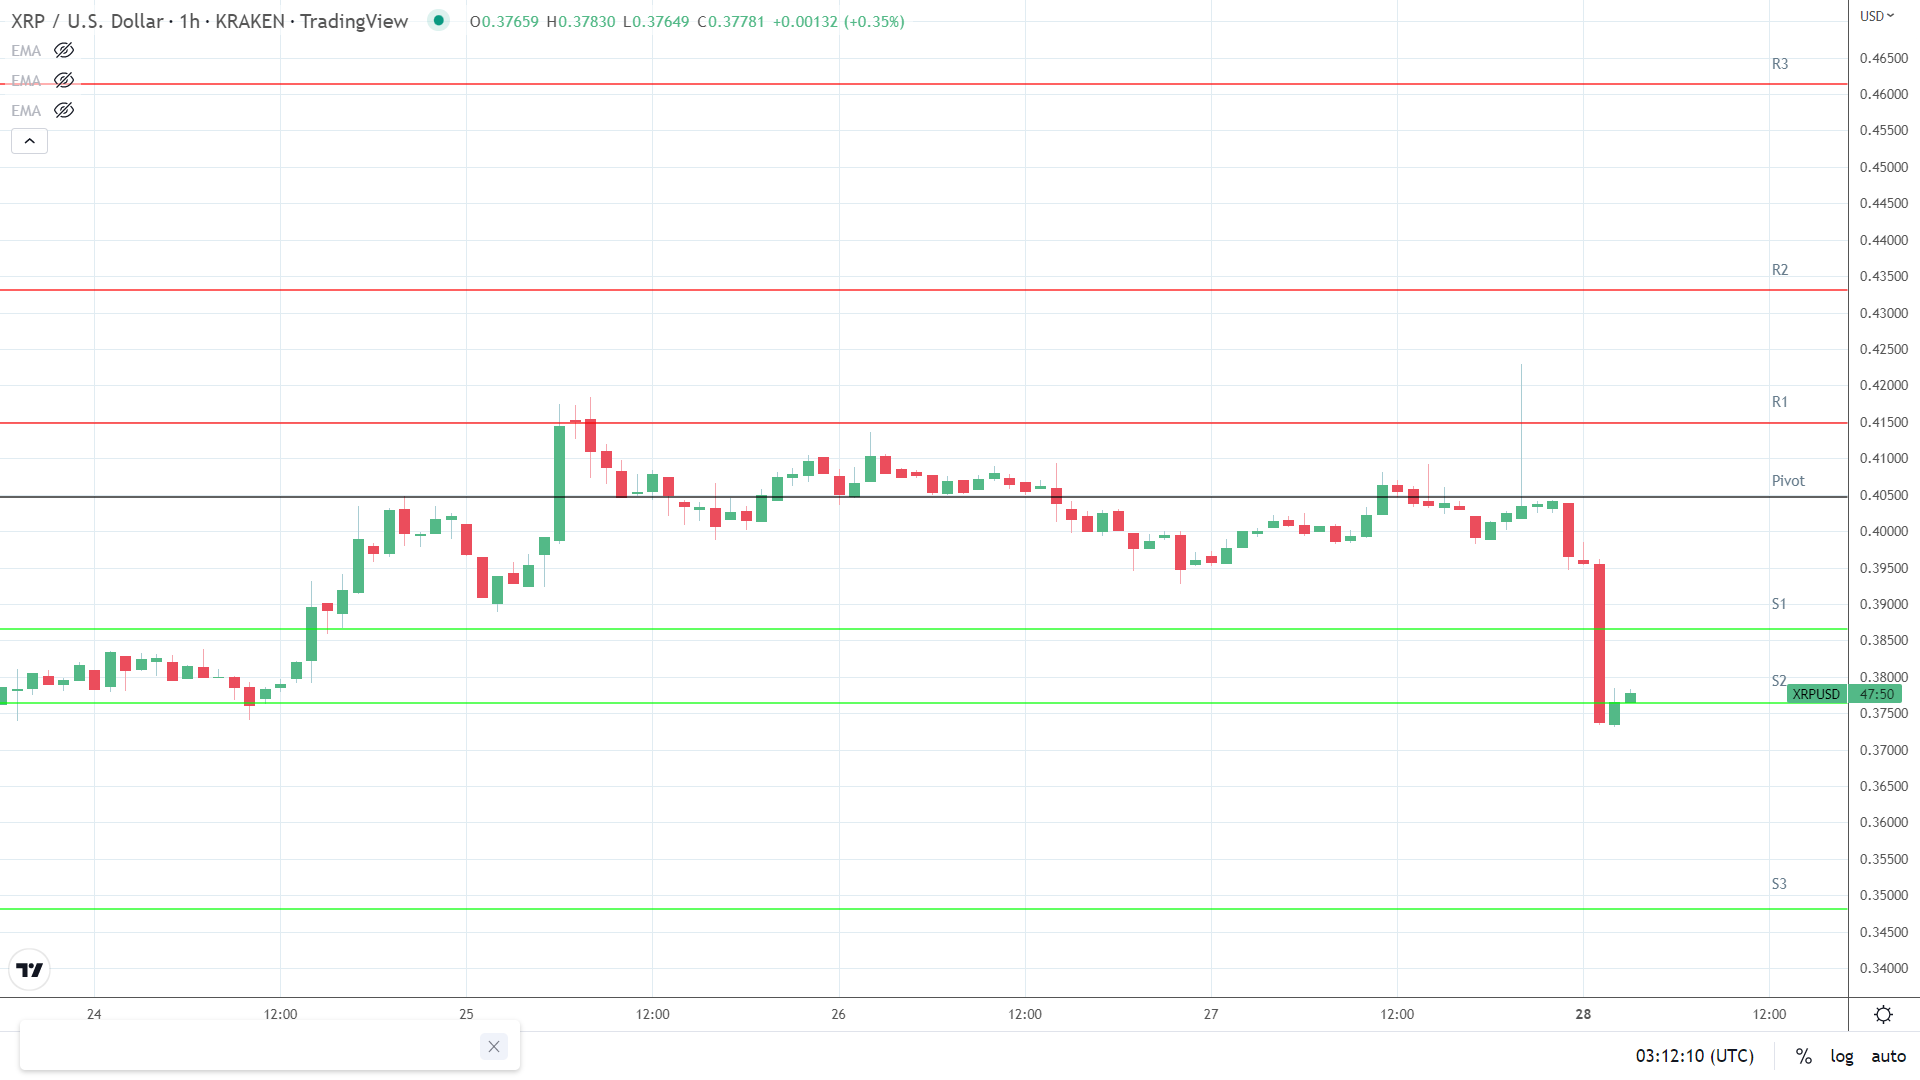 XRP support levels in play.